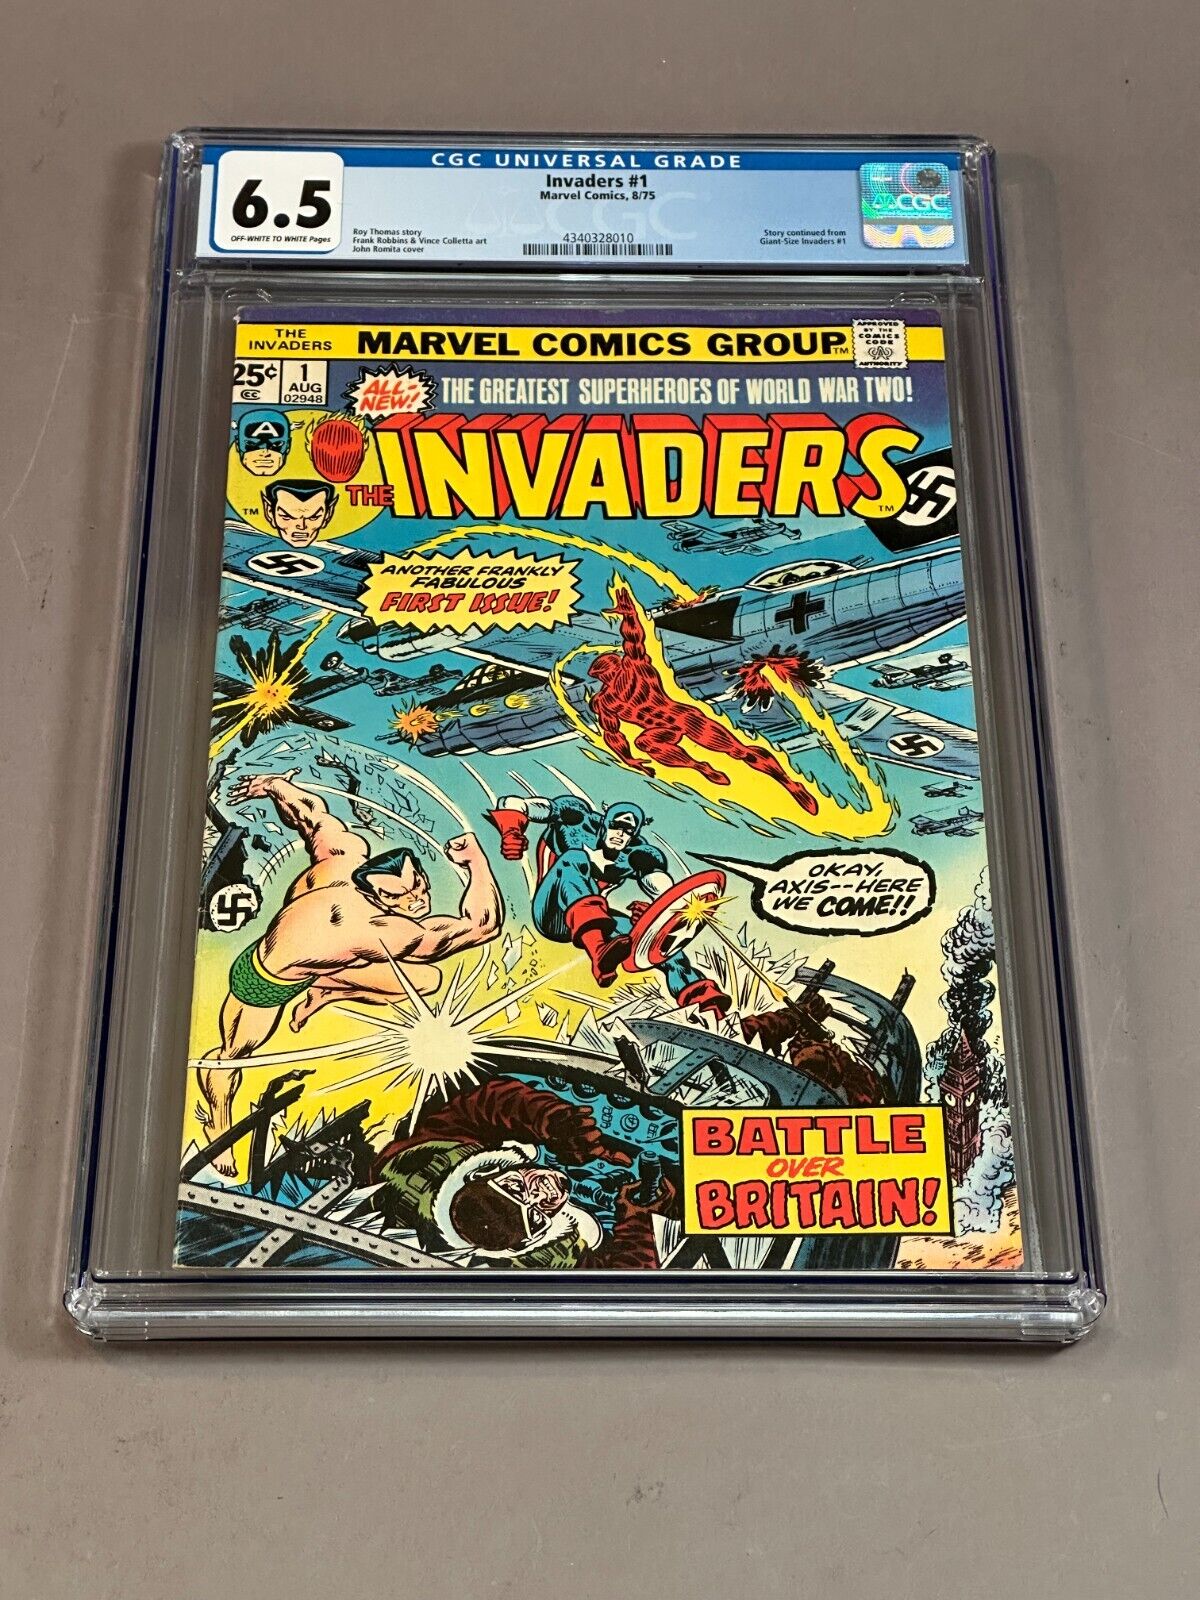 Marvel Comics The Invaders # 1 comic CGC slabbed and graded 6.5